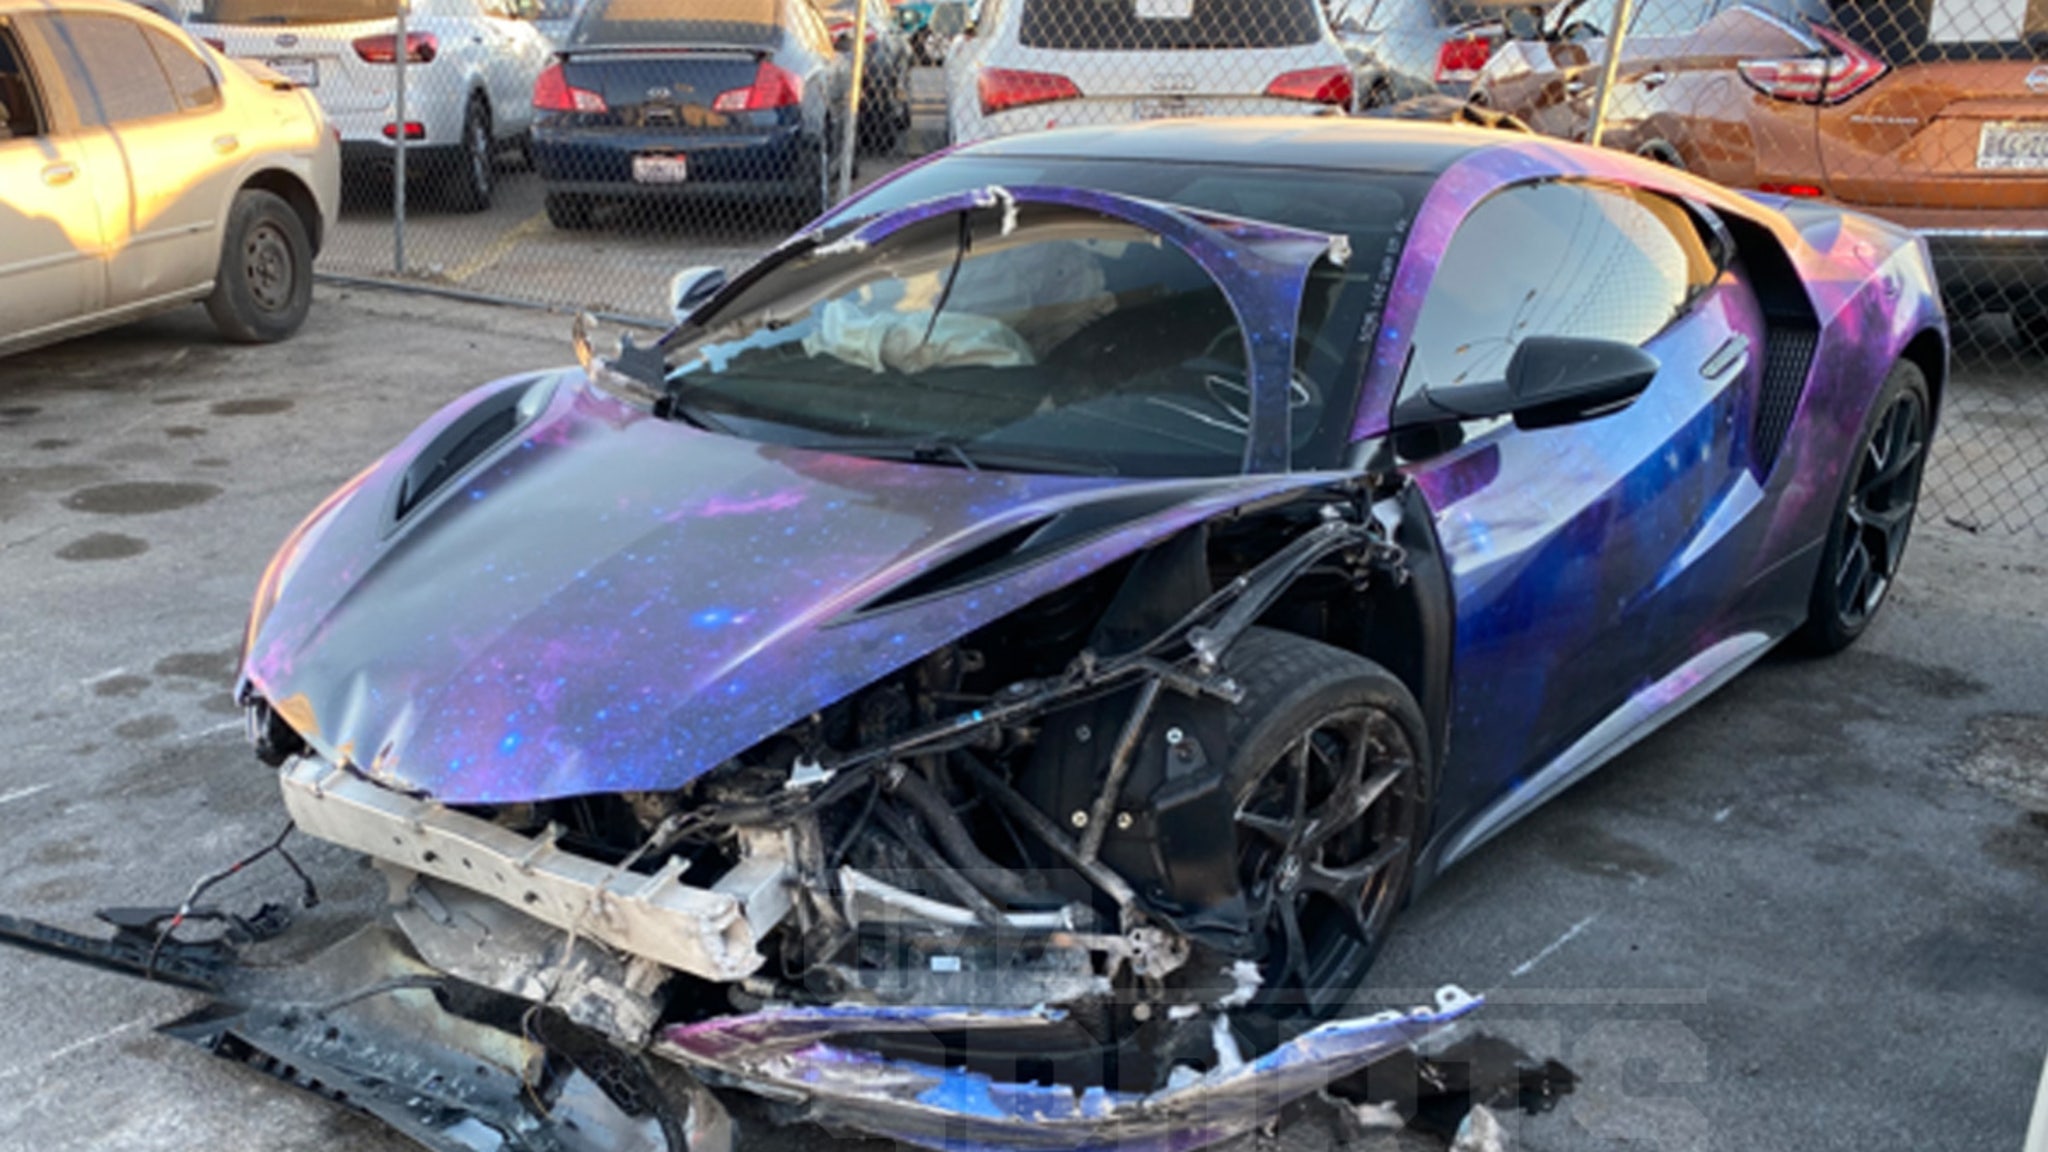 NFL star Josh Jacobs Crash Photos Show $ 160K Supercar mutilated after accident in Vegas